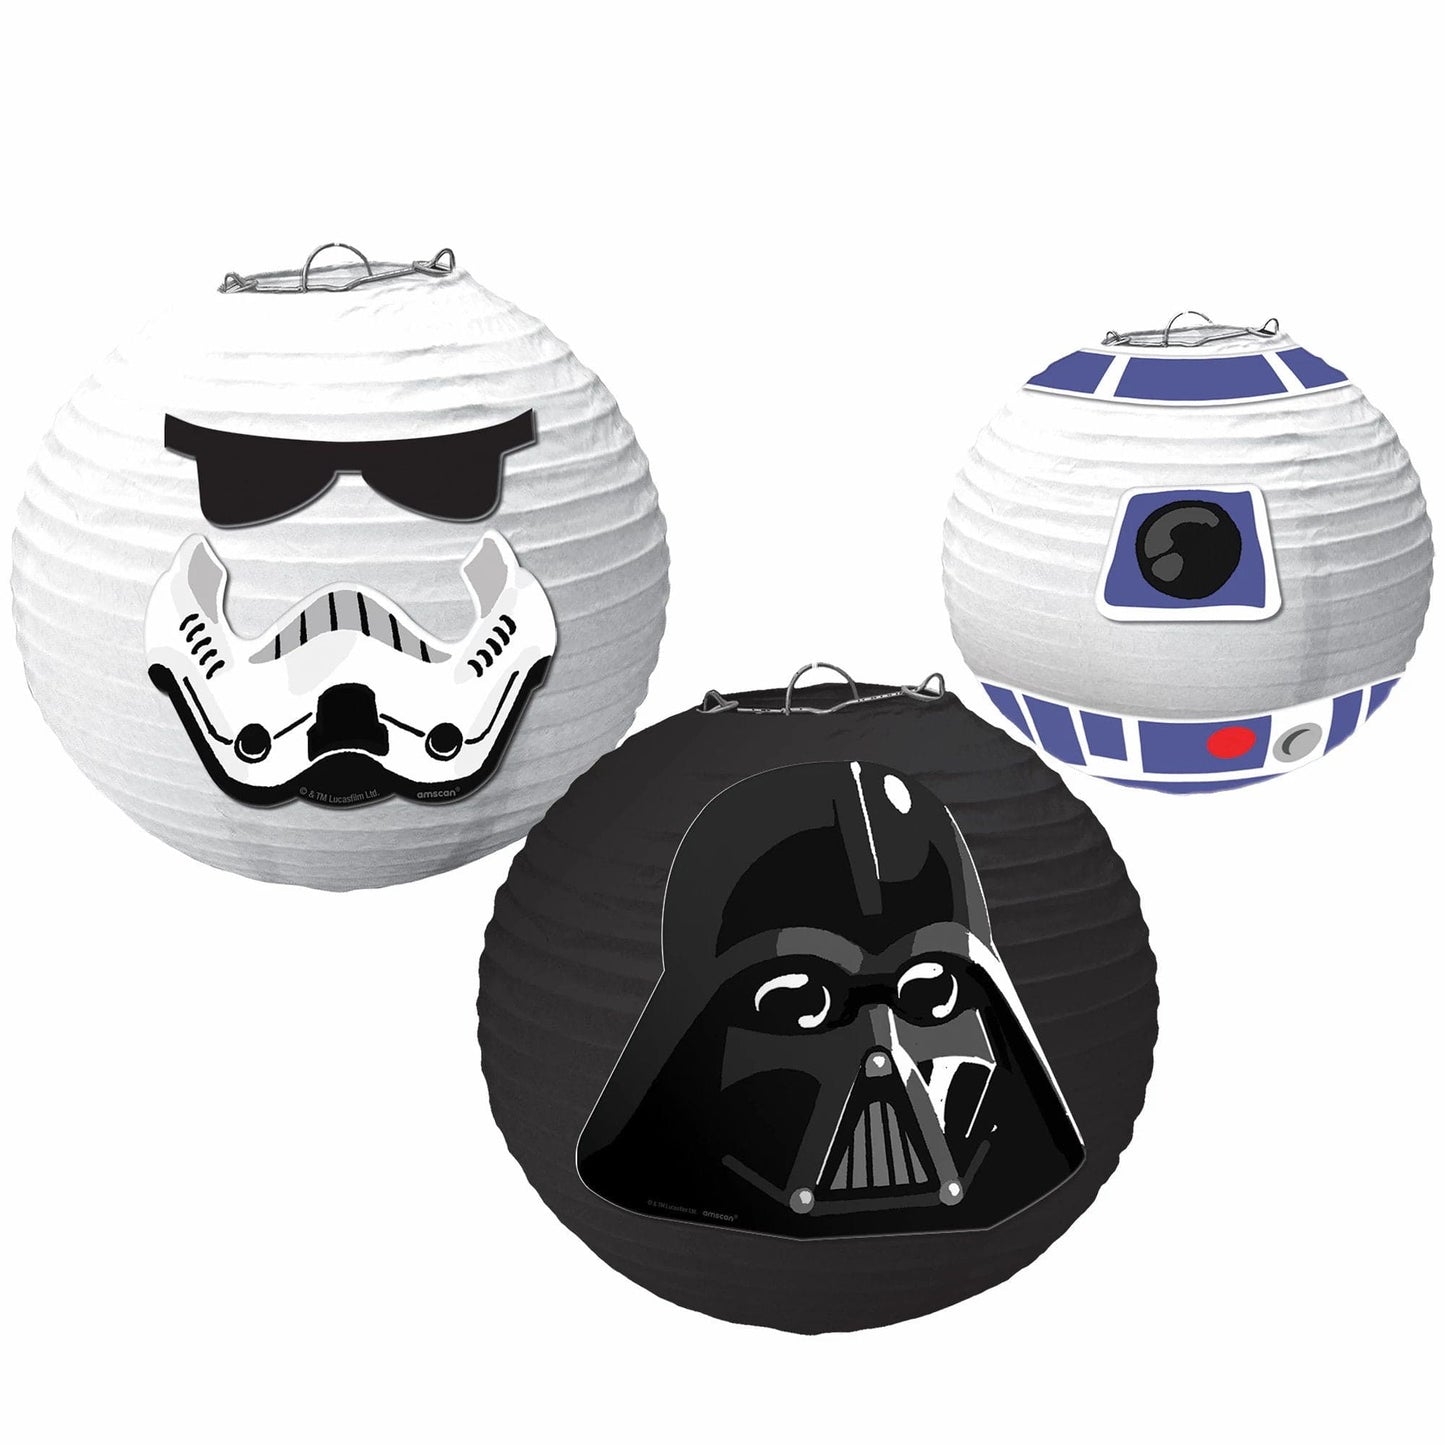 Star Wars Galaxy of Adventures Paper Lanterns with Add On's